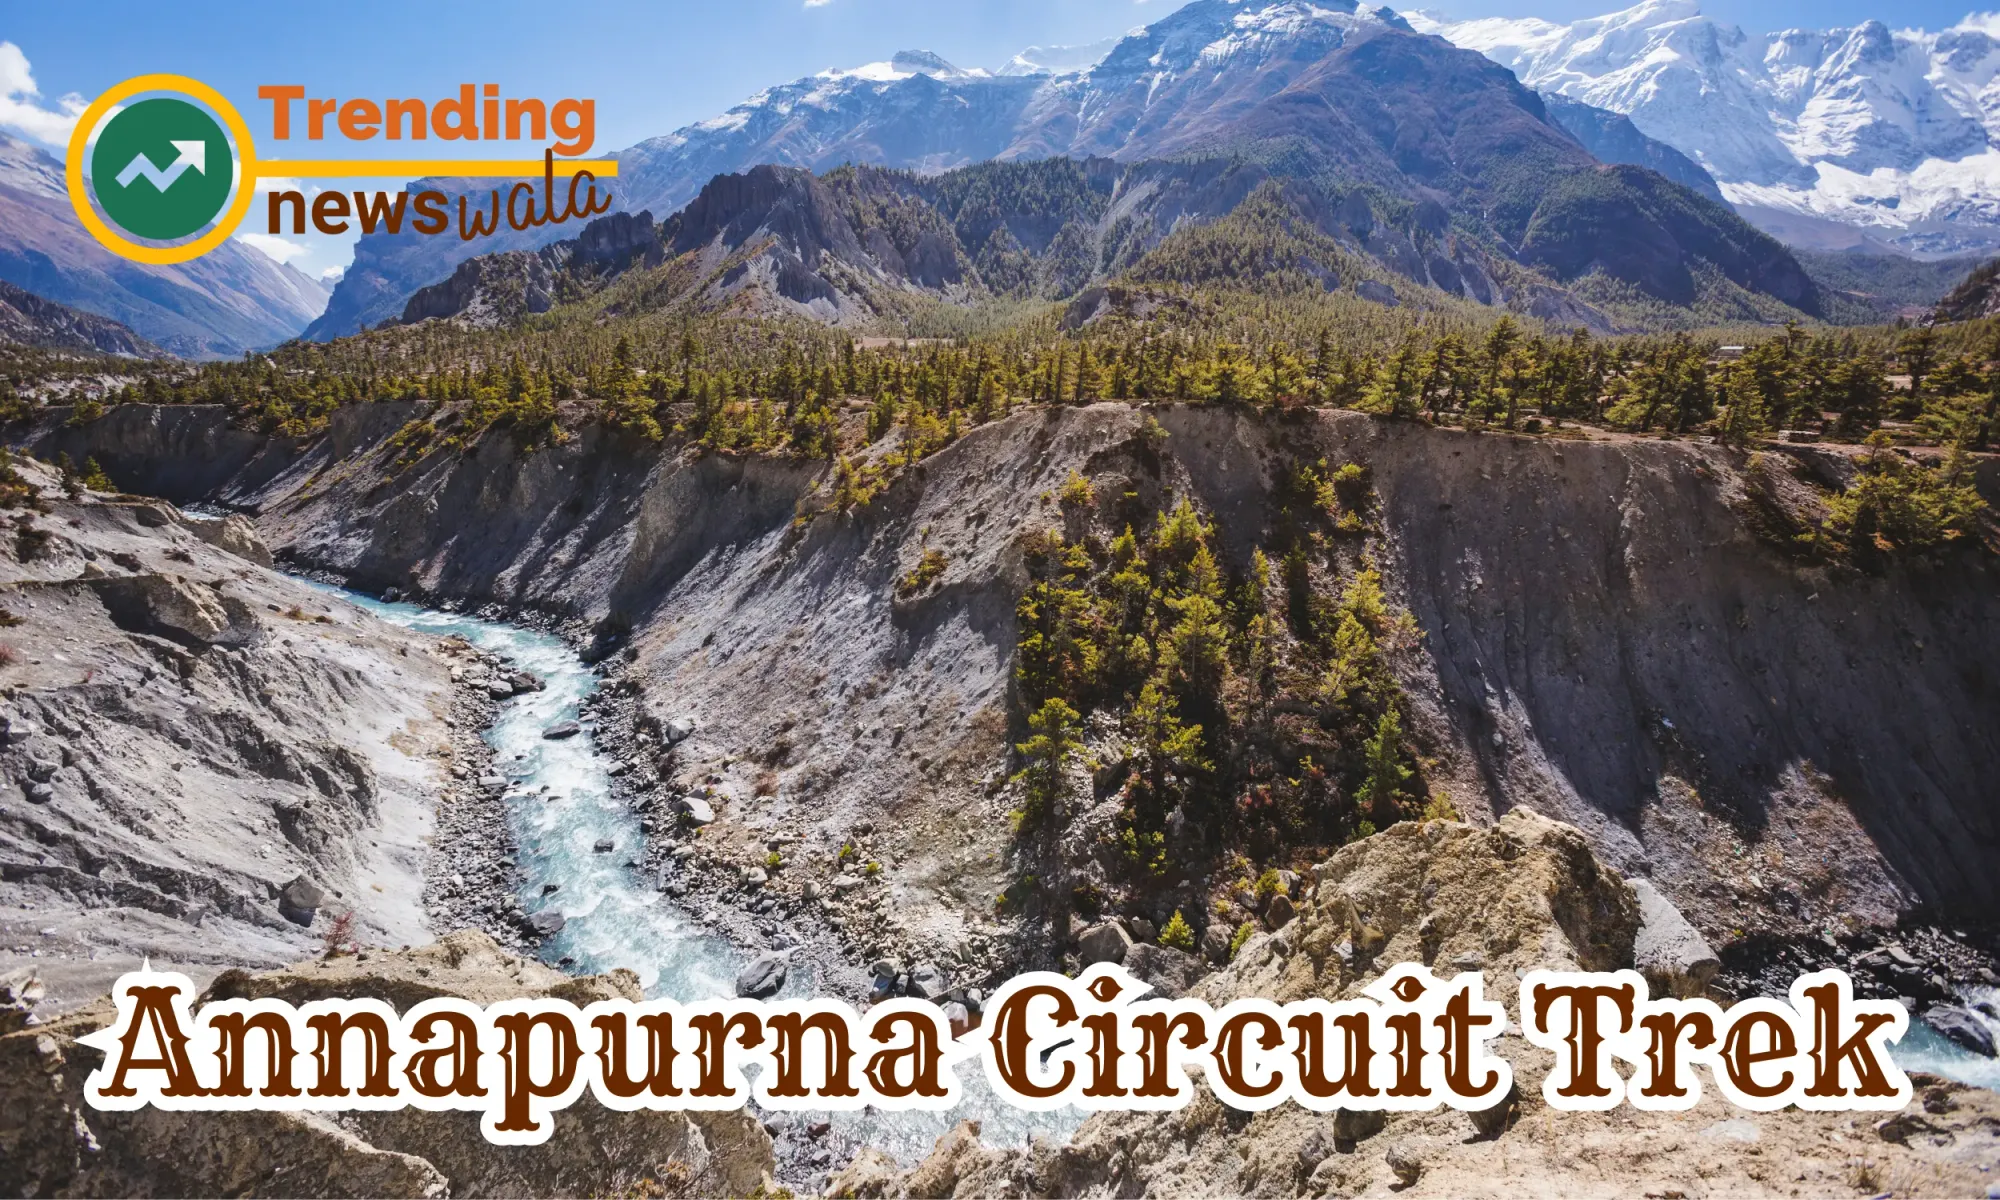 The Annapurna Circuit Trek is a classic and diverse trekking route